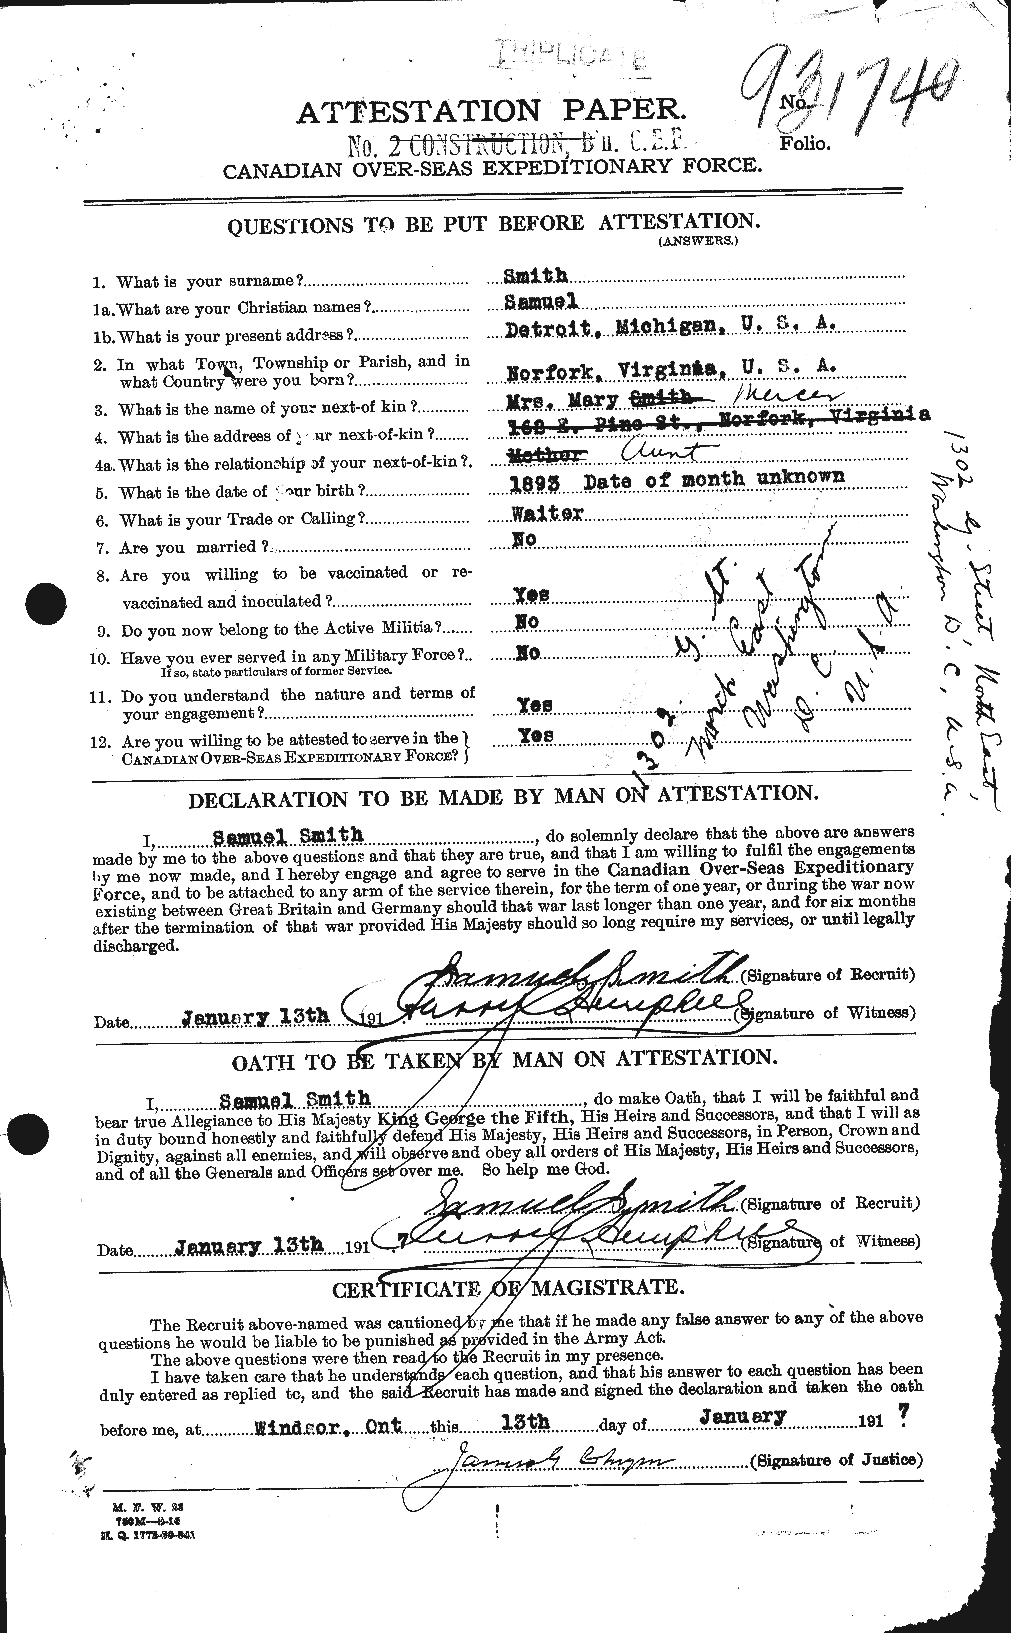 Personnel Records of the First World War - CEF 108763a